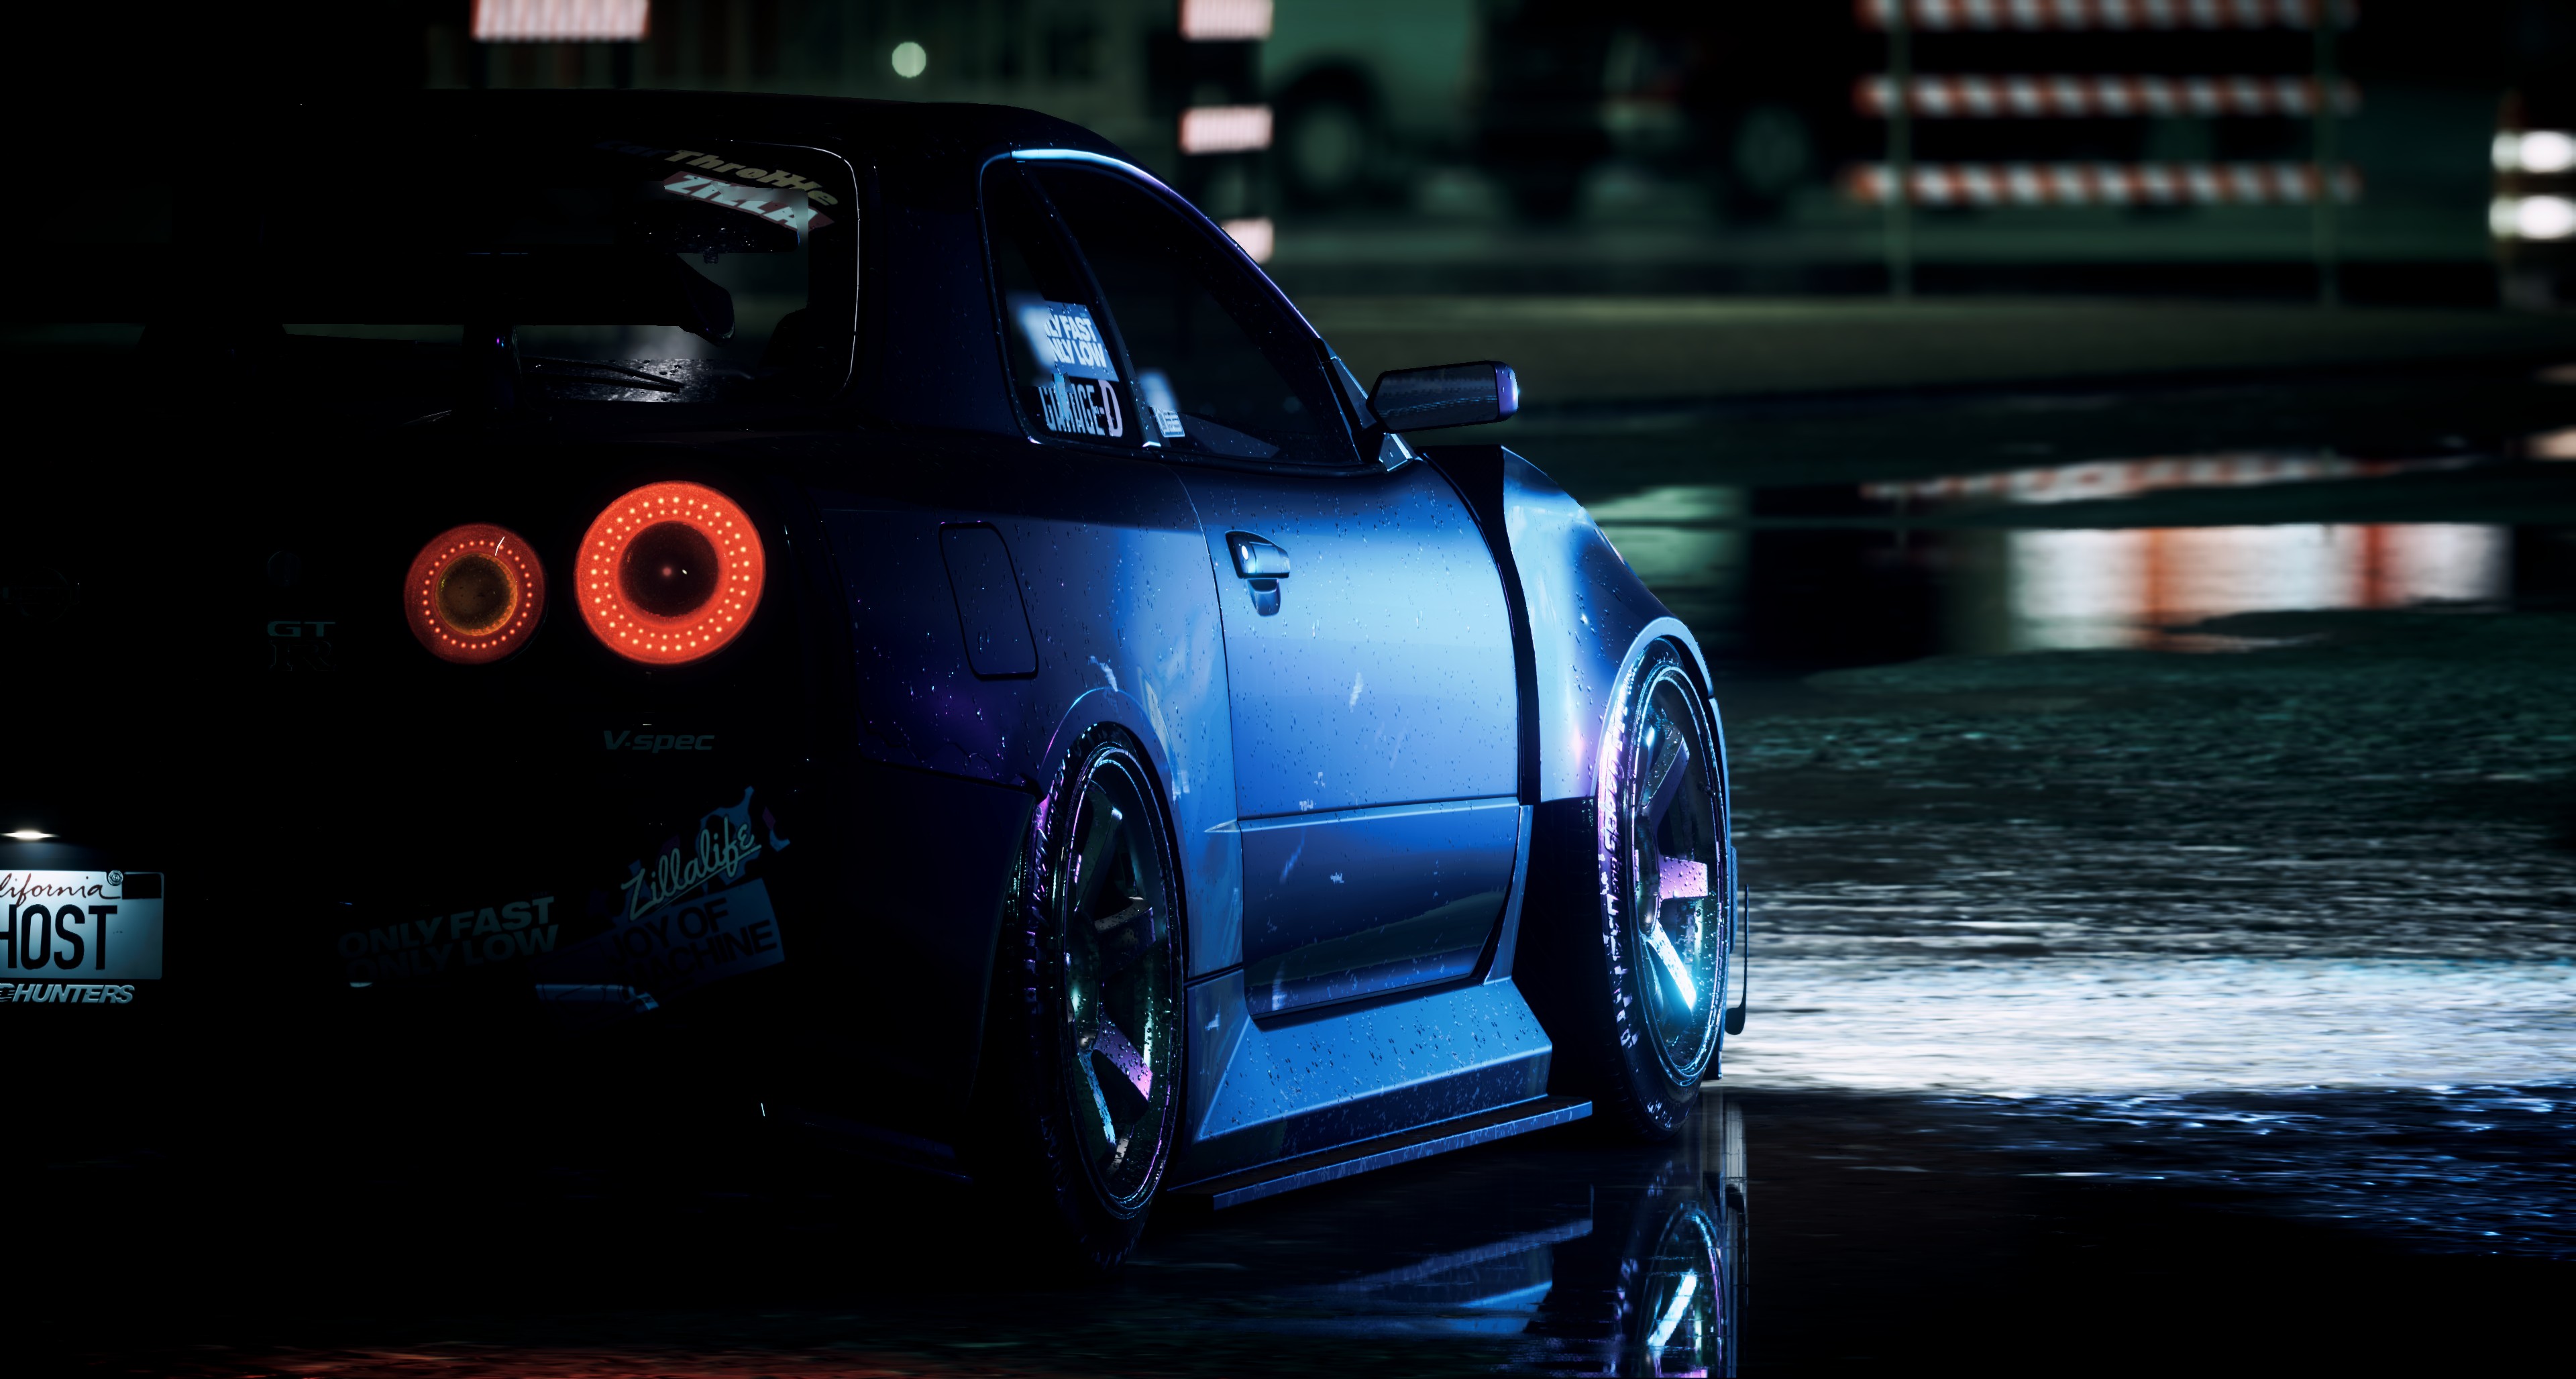 General 3840x2056 Need for Speed 2015 Need for Speed Nissan Nissan Skyline R34 blue cars screen shot Nissan Skyline car